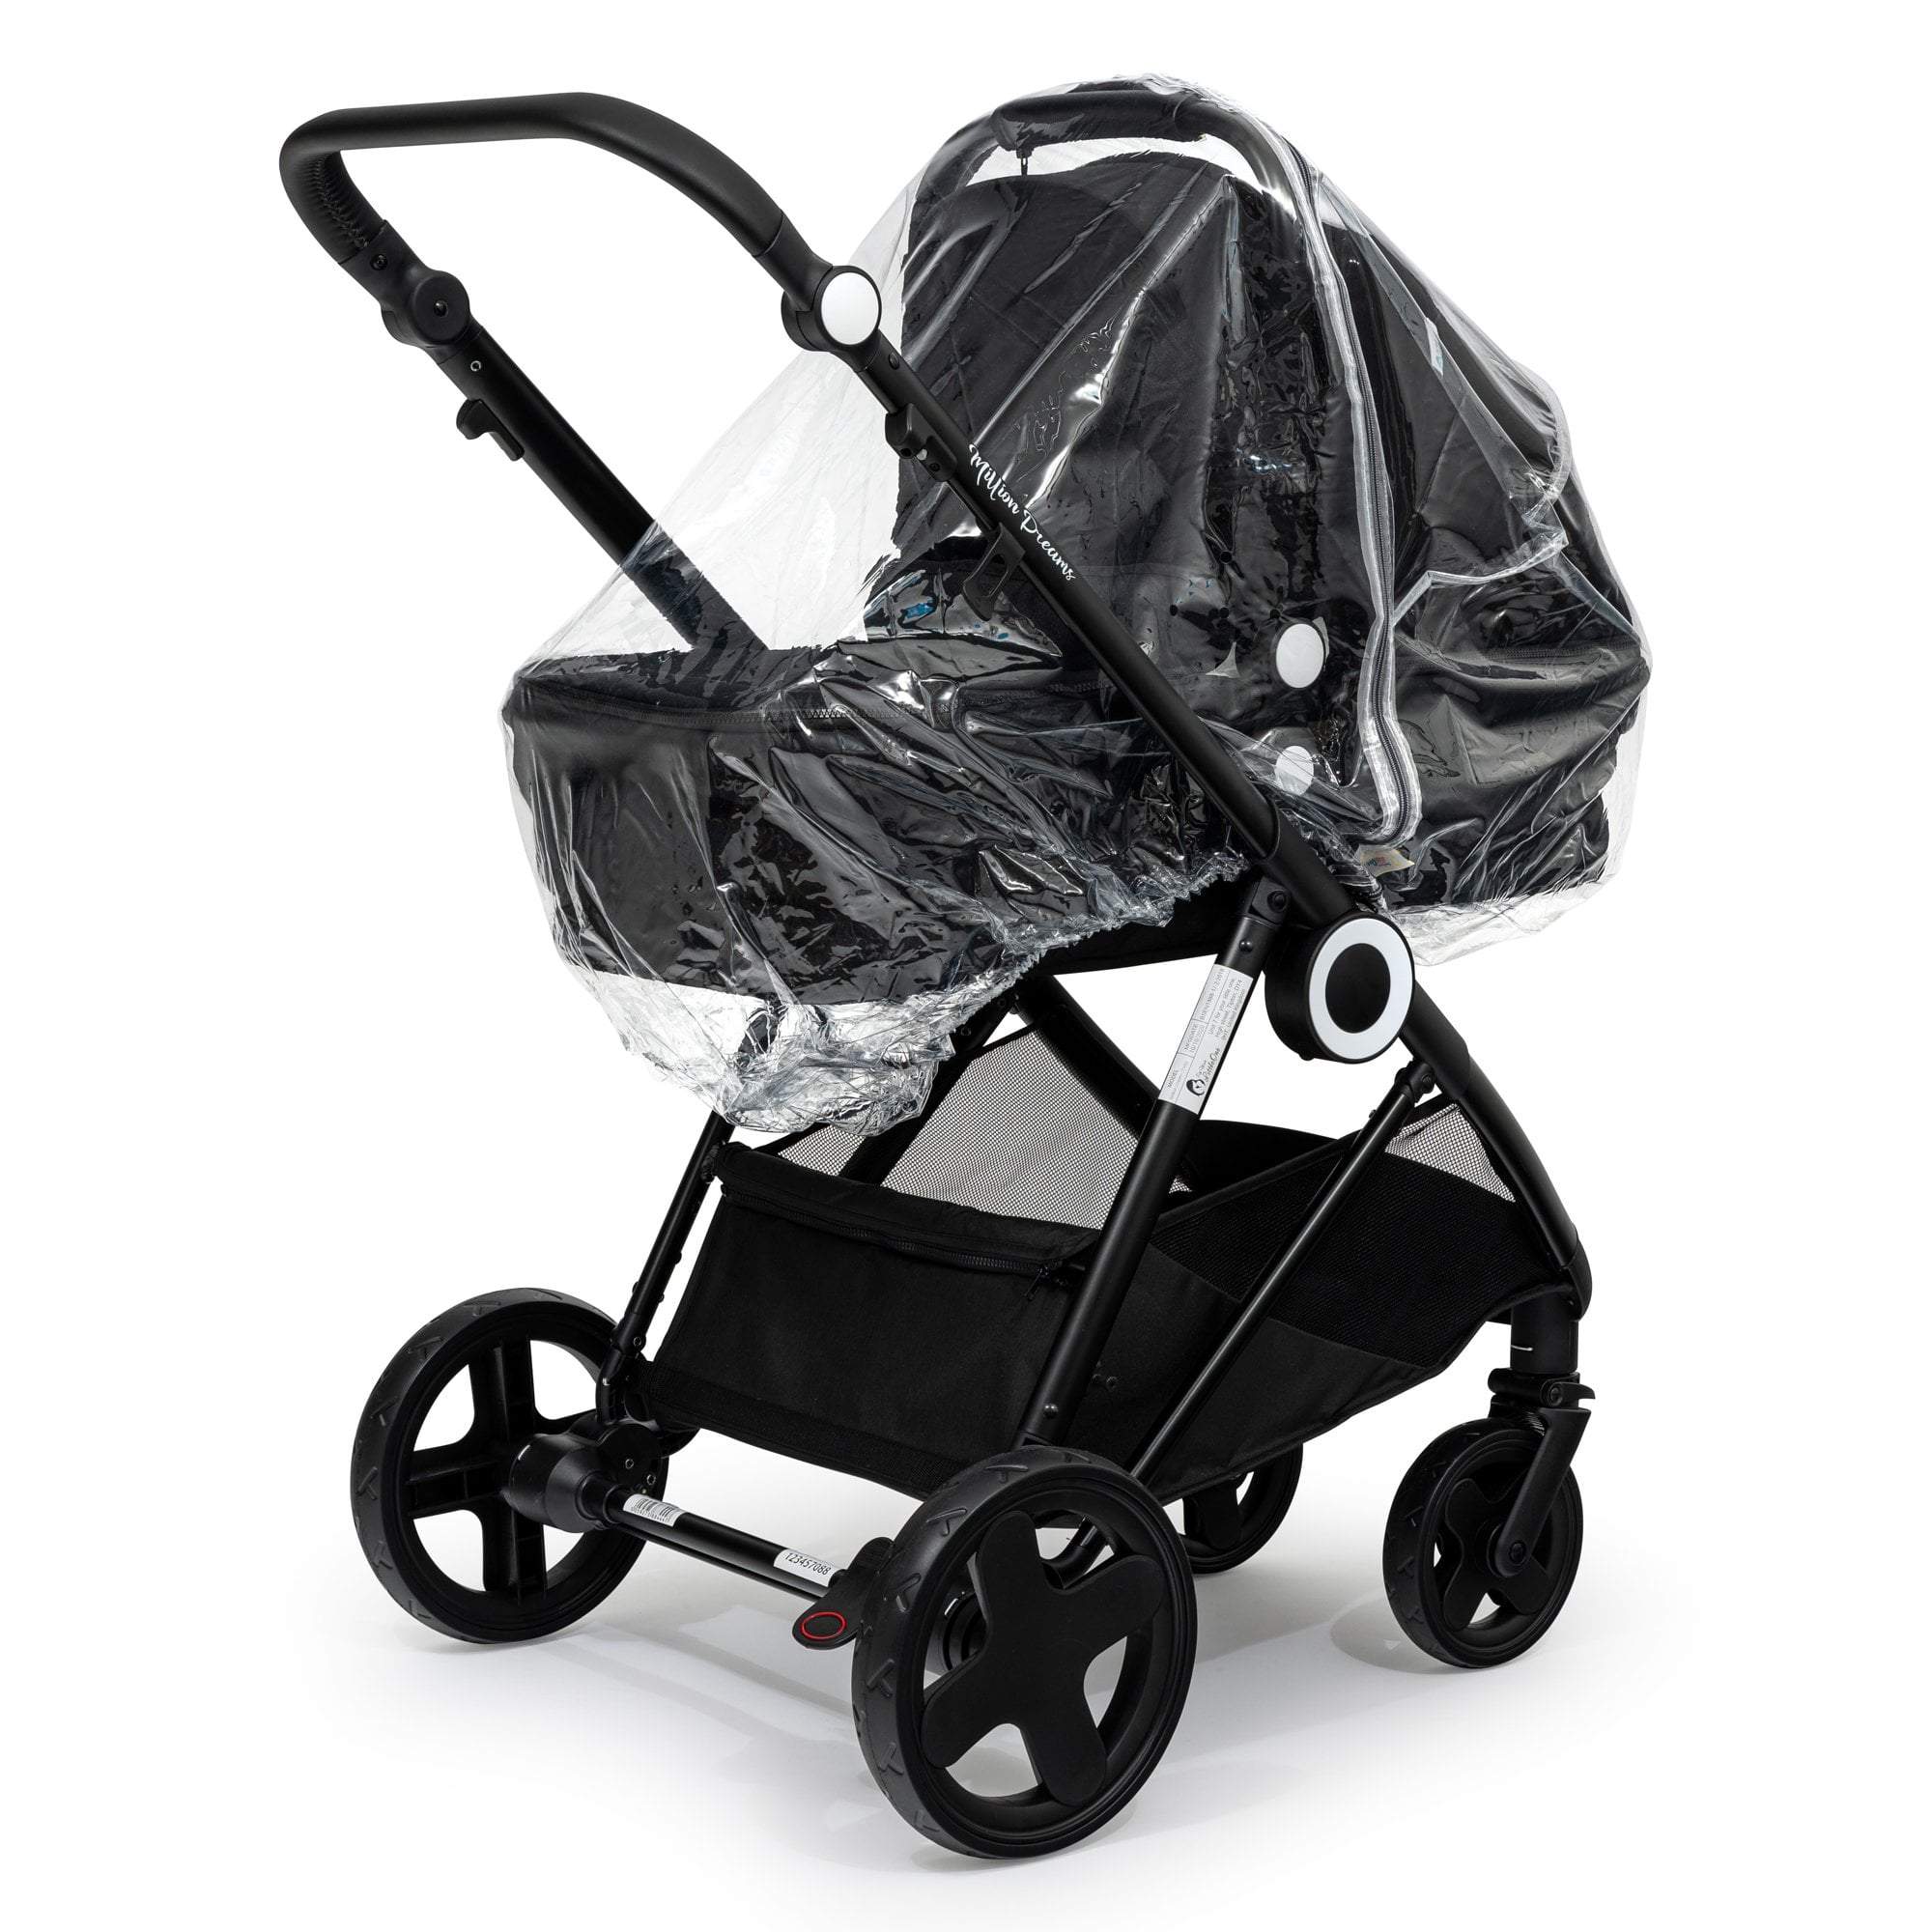 Carrycot Raincover Compatible With My Babiie - Fits All Models - For Your Little One